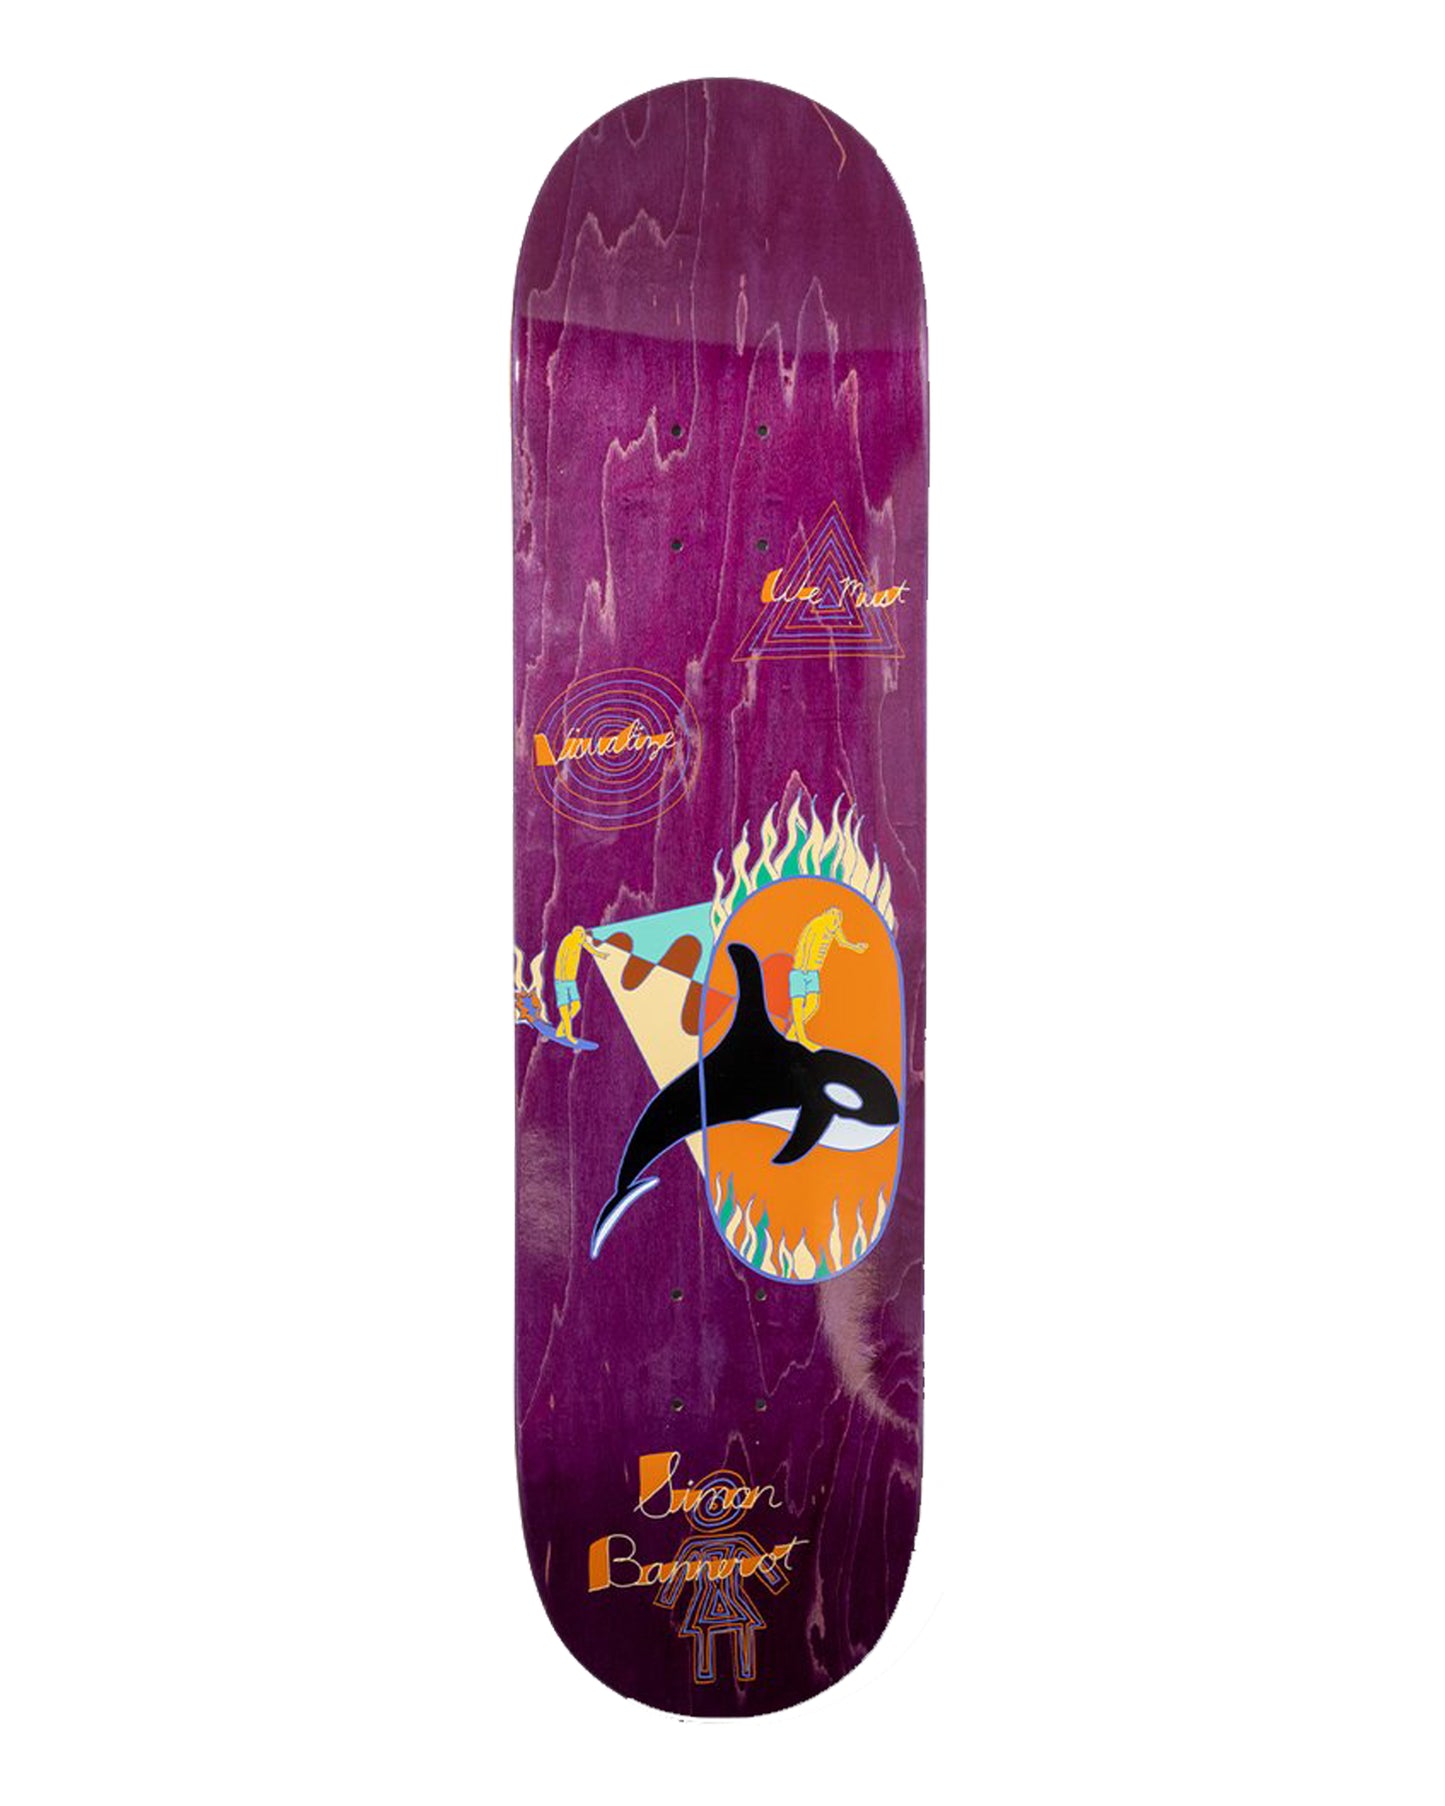 8.25 GIRL BANNEROT VISUALIZE DECK